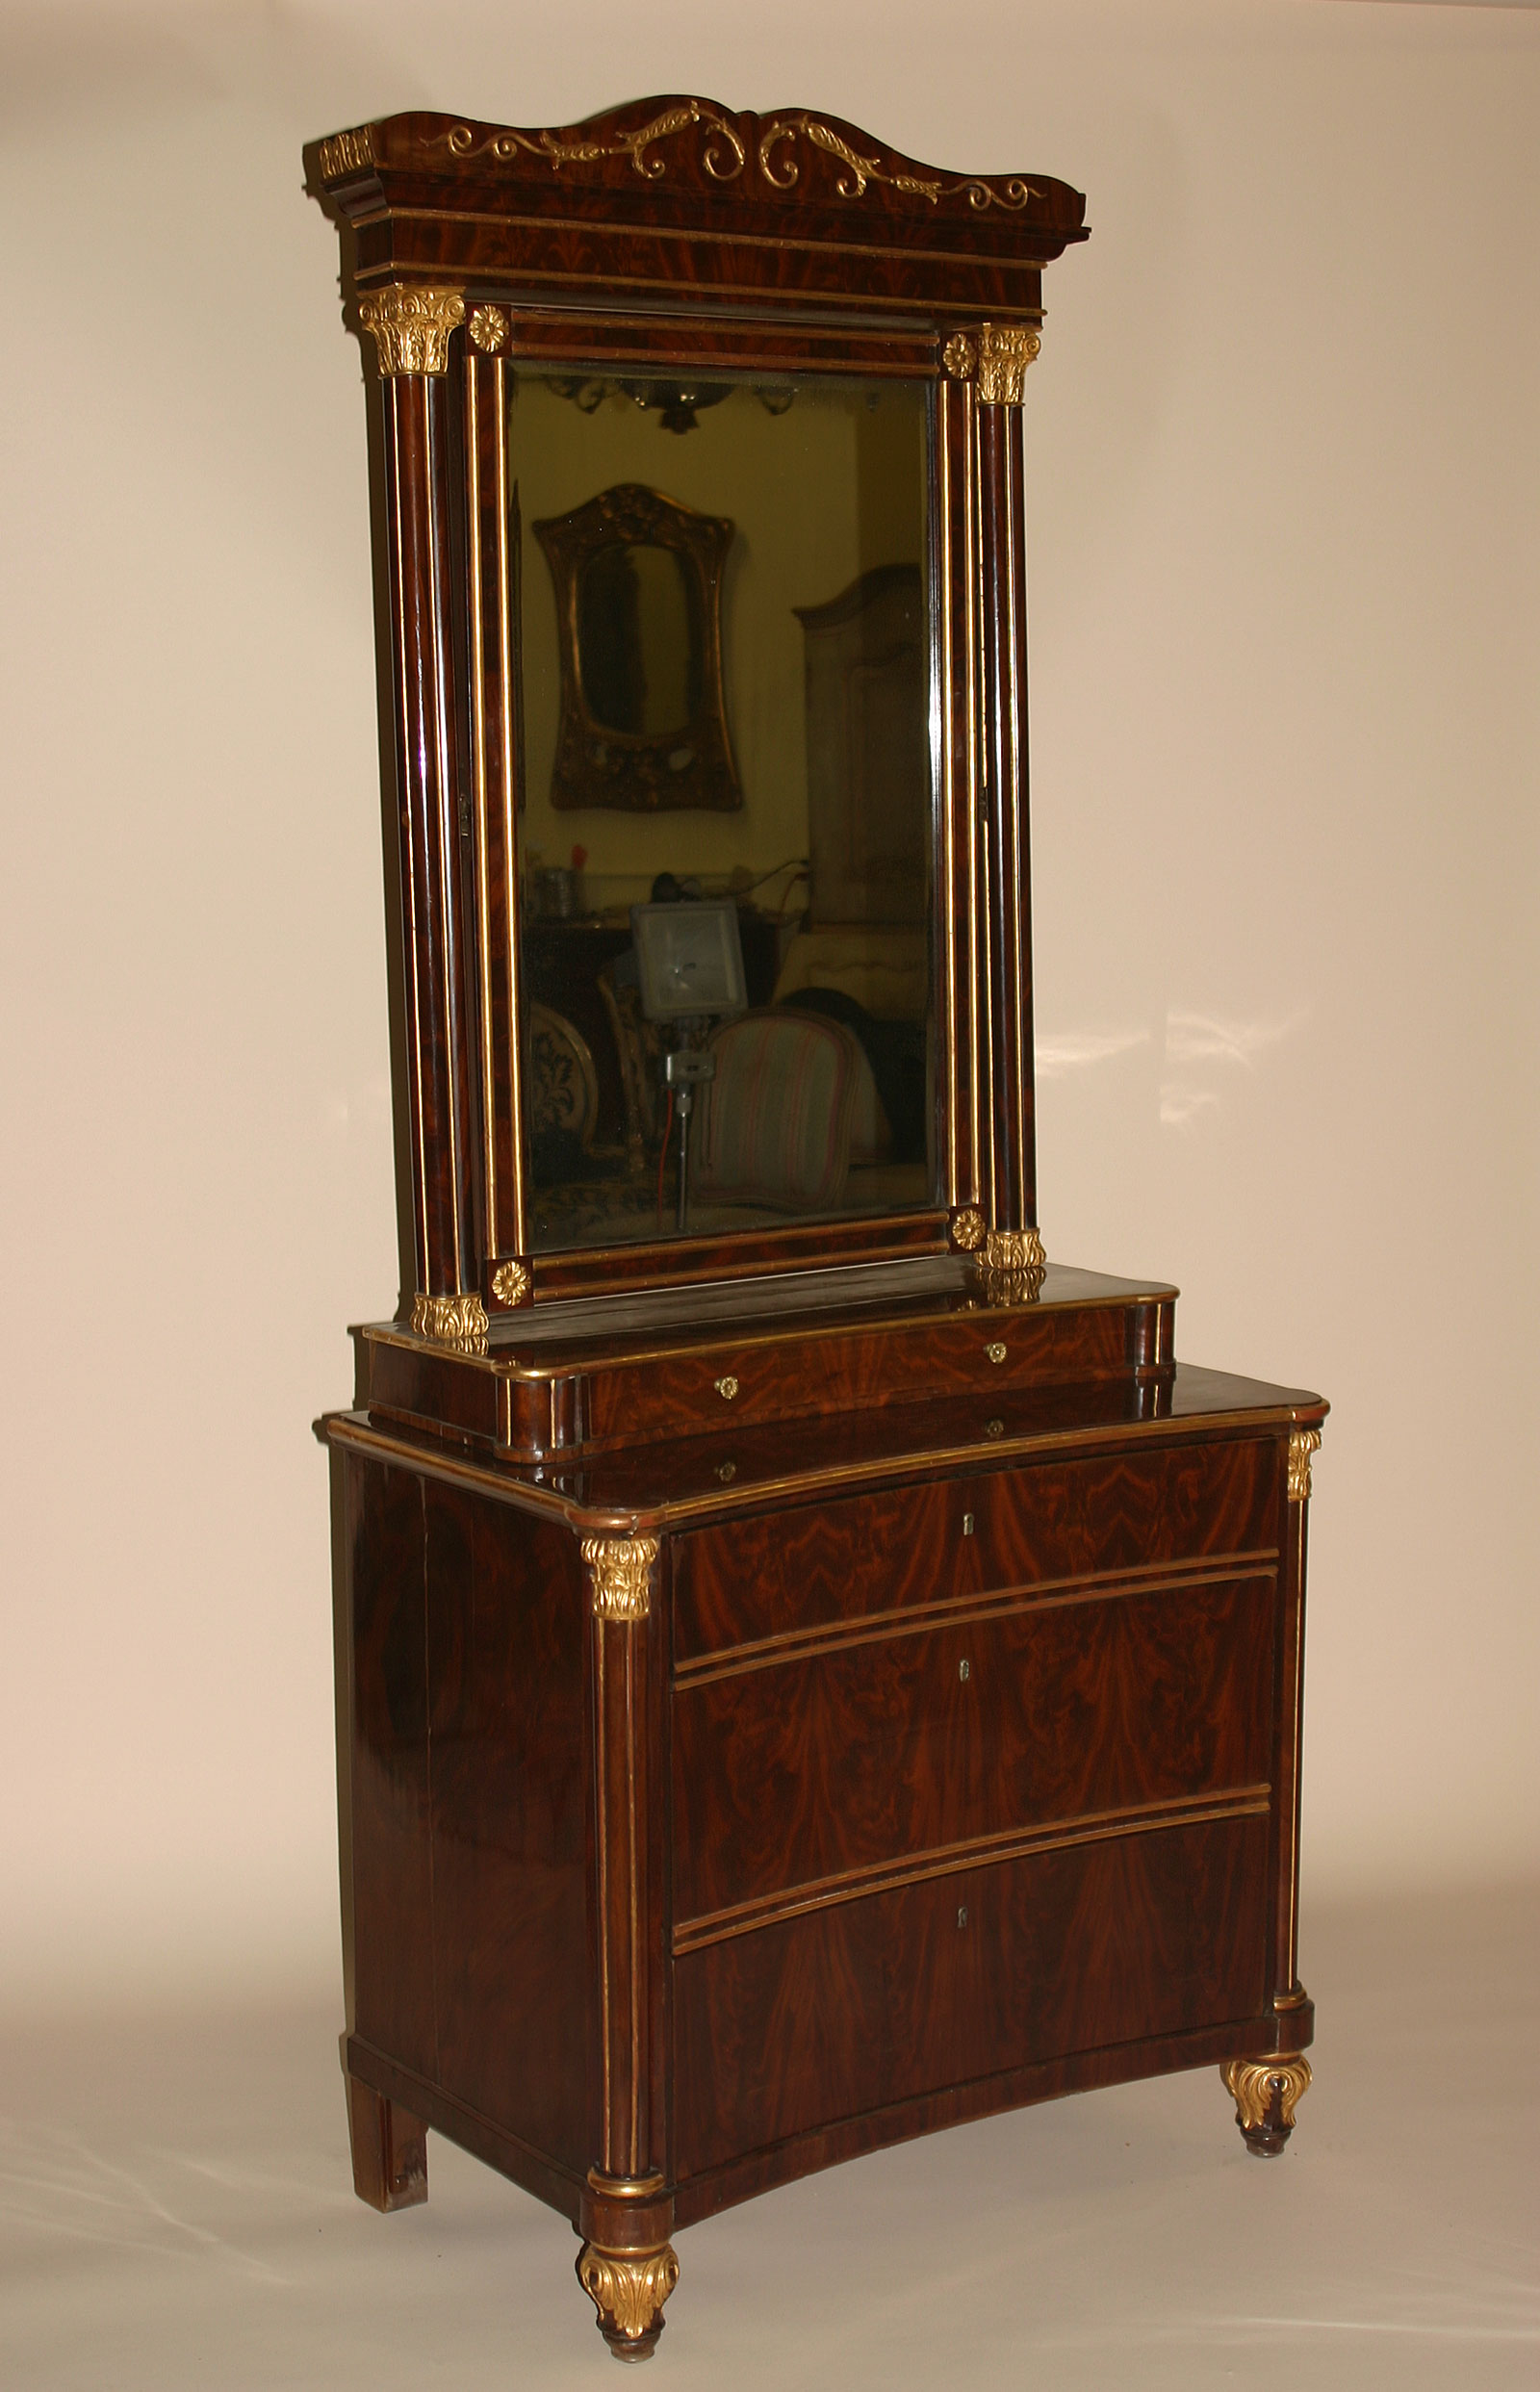 Very fine, Spanish, Neoclassical, flame mahogany and parcel-gilt coiffeuse